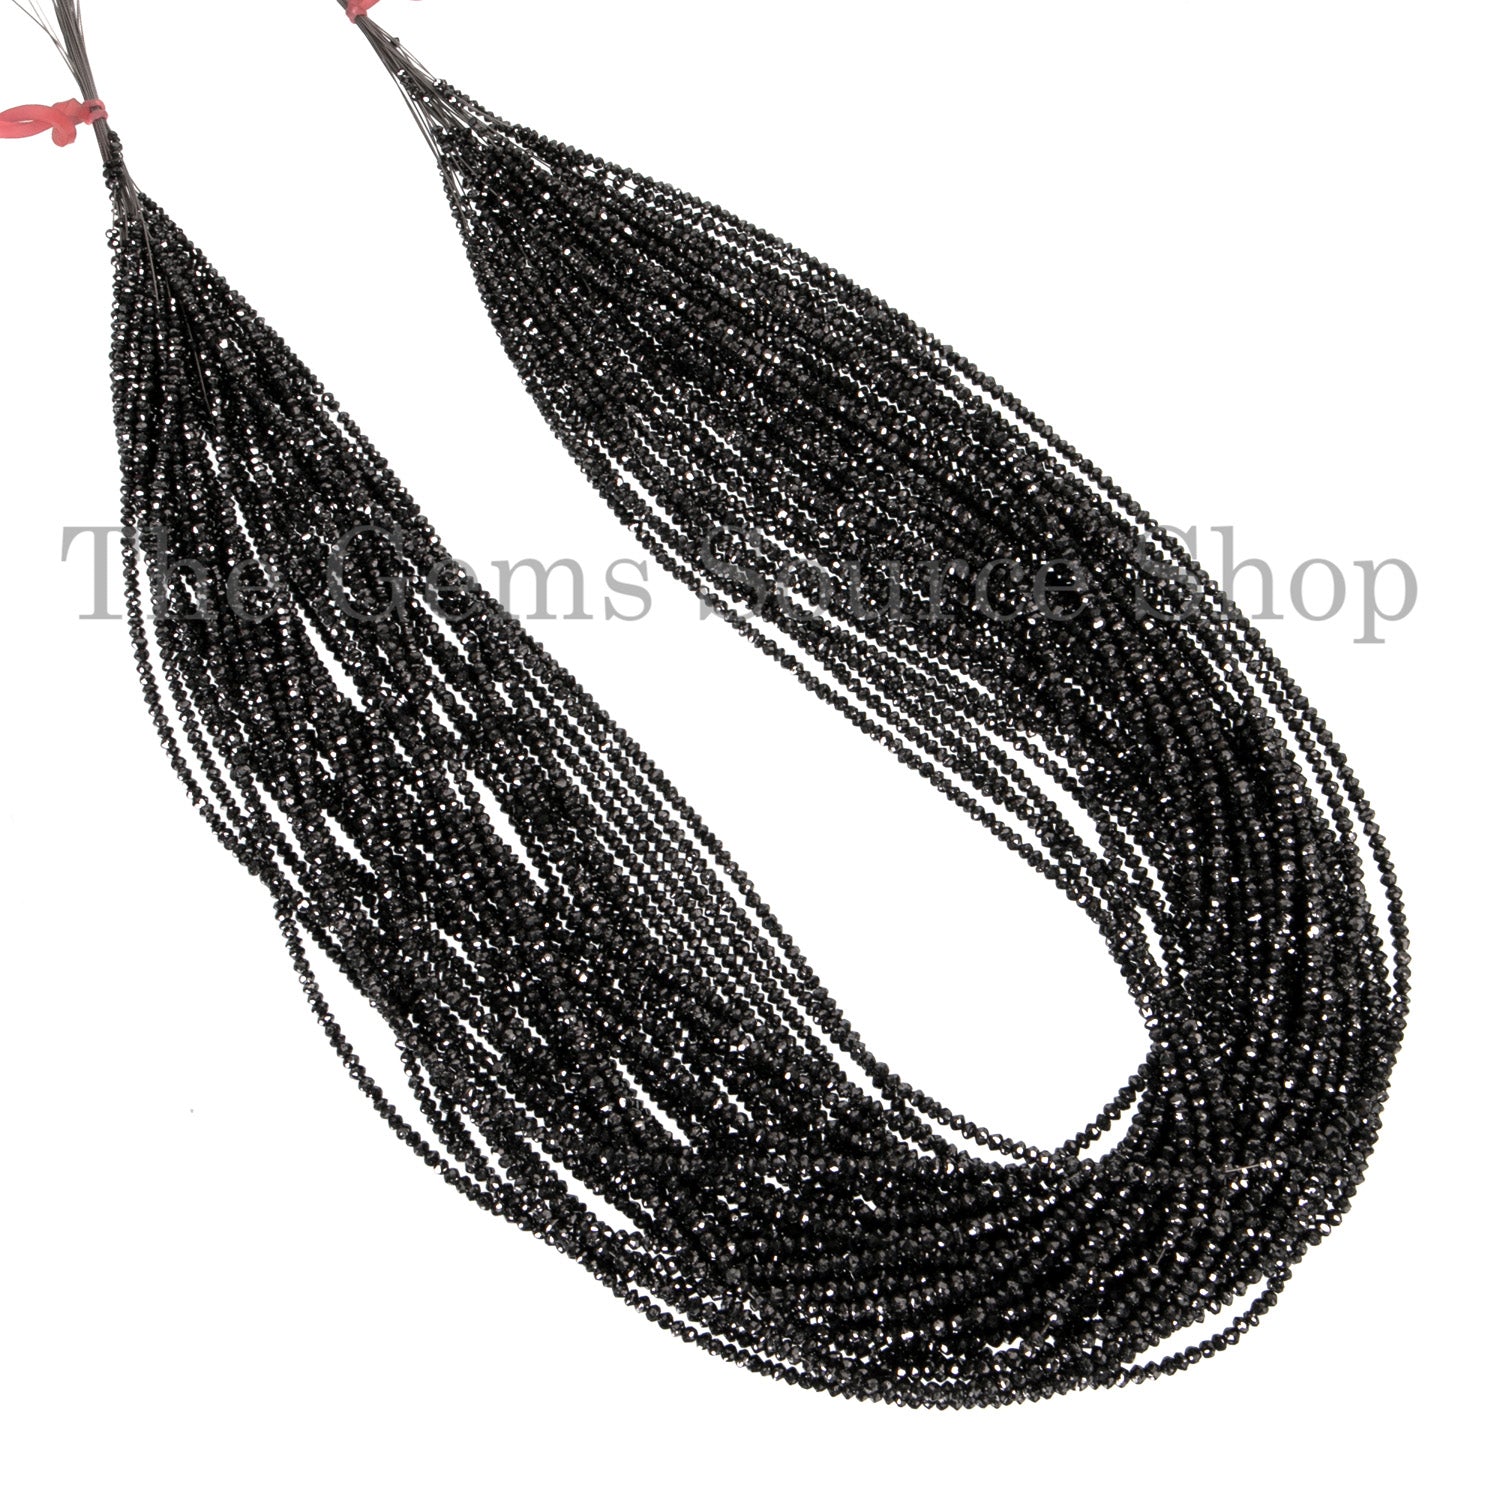 Top Quality Black Diamond Faceted Rondelle Beads, Black Diamond Beads, Rondelle Beads, Gemstone Rondelle